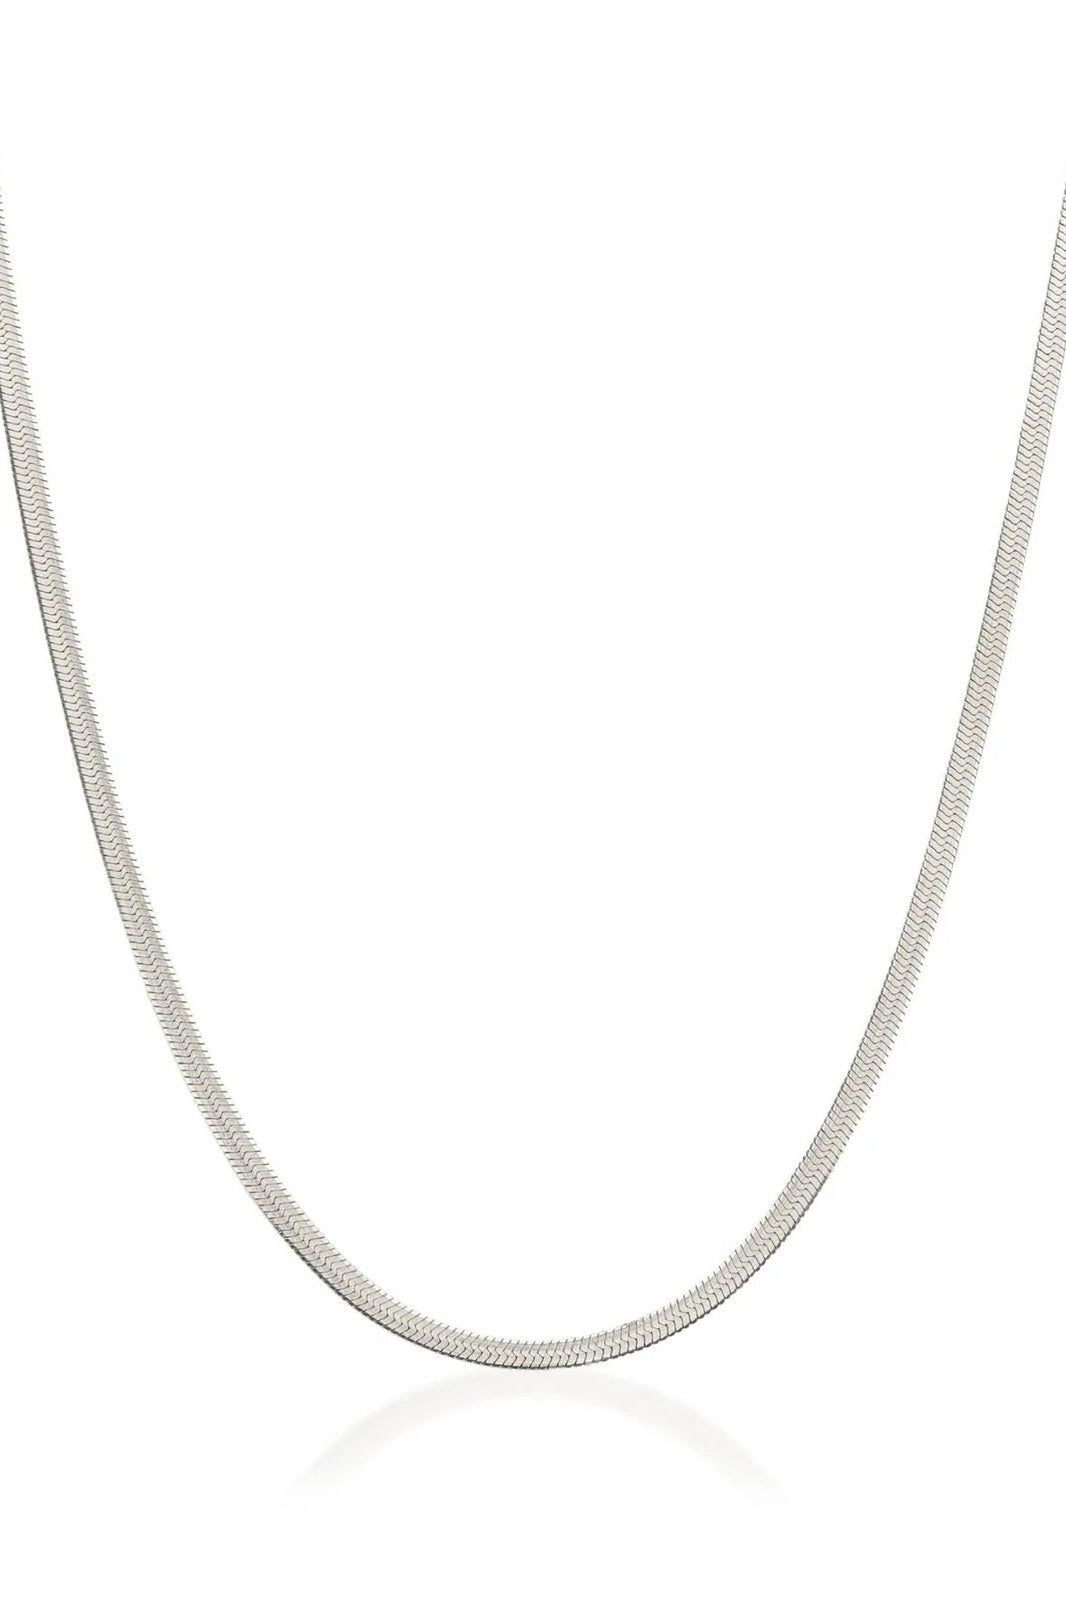 Sphinx 3mm Chain Necklace - Silver